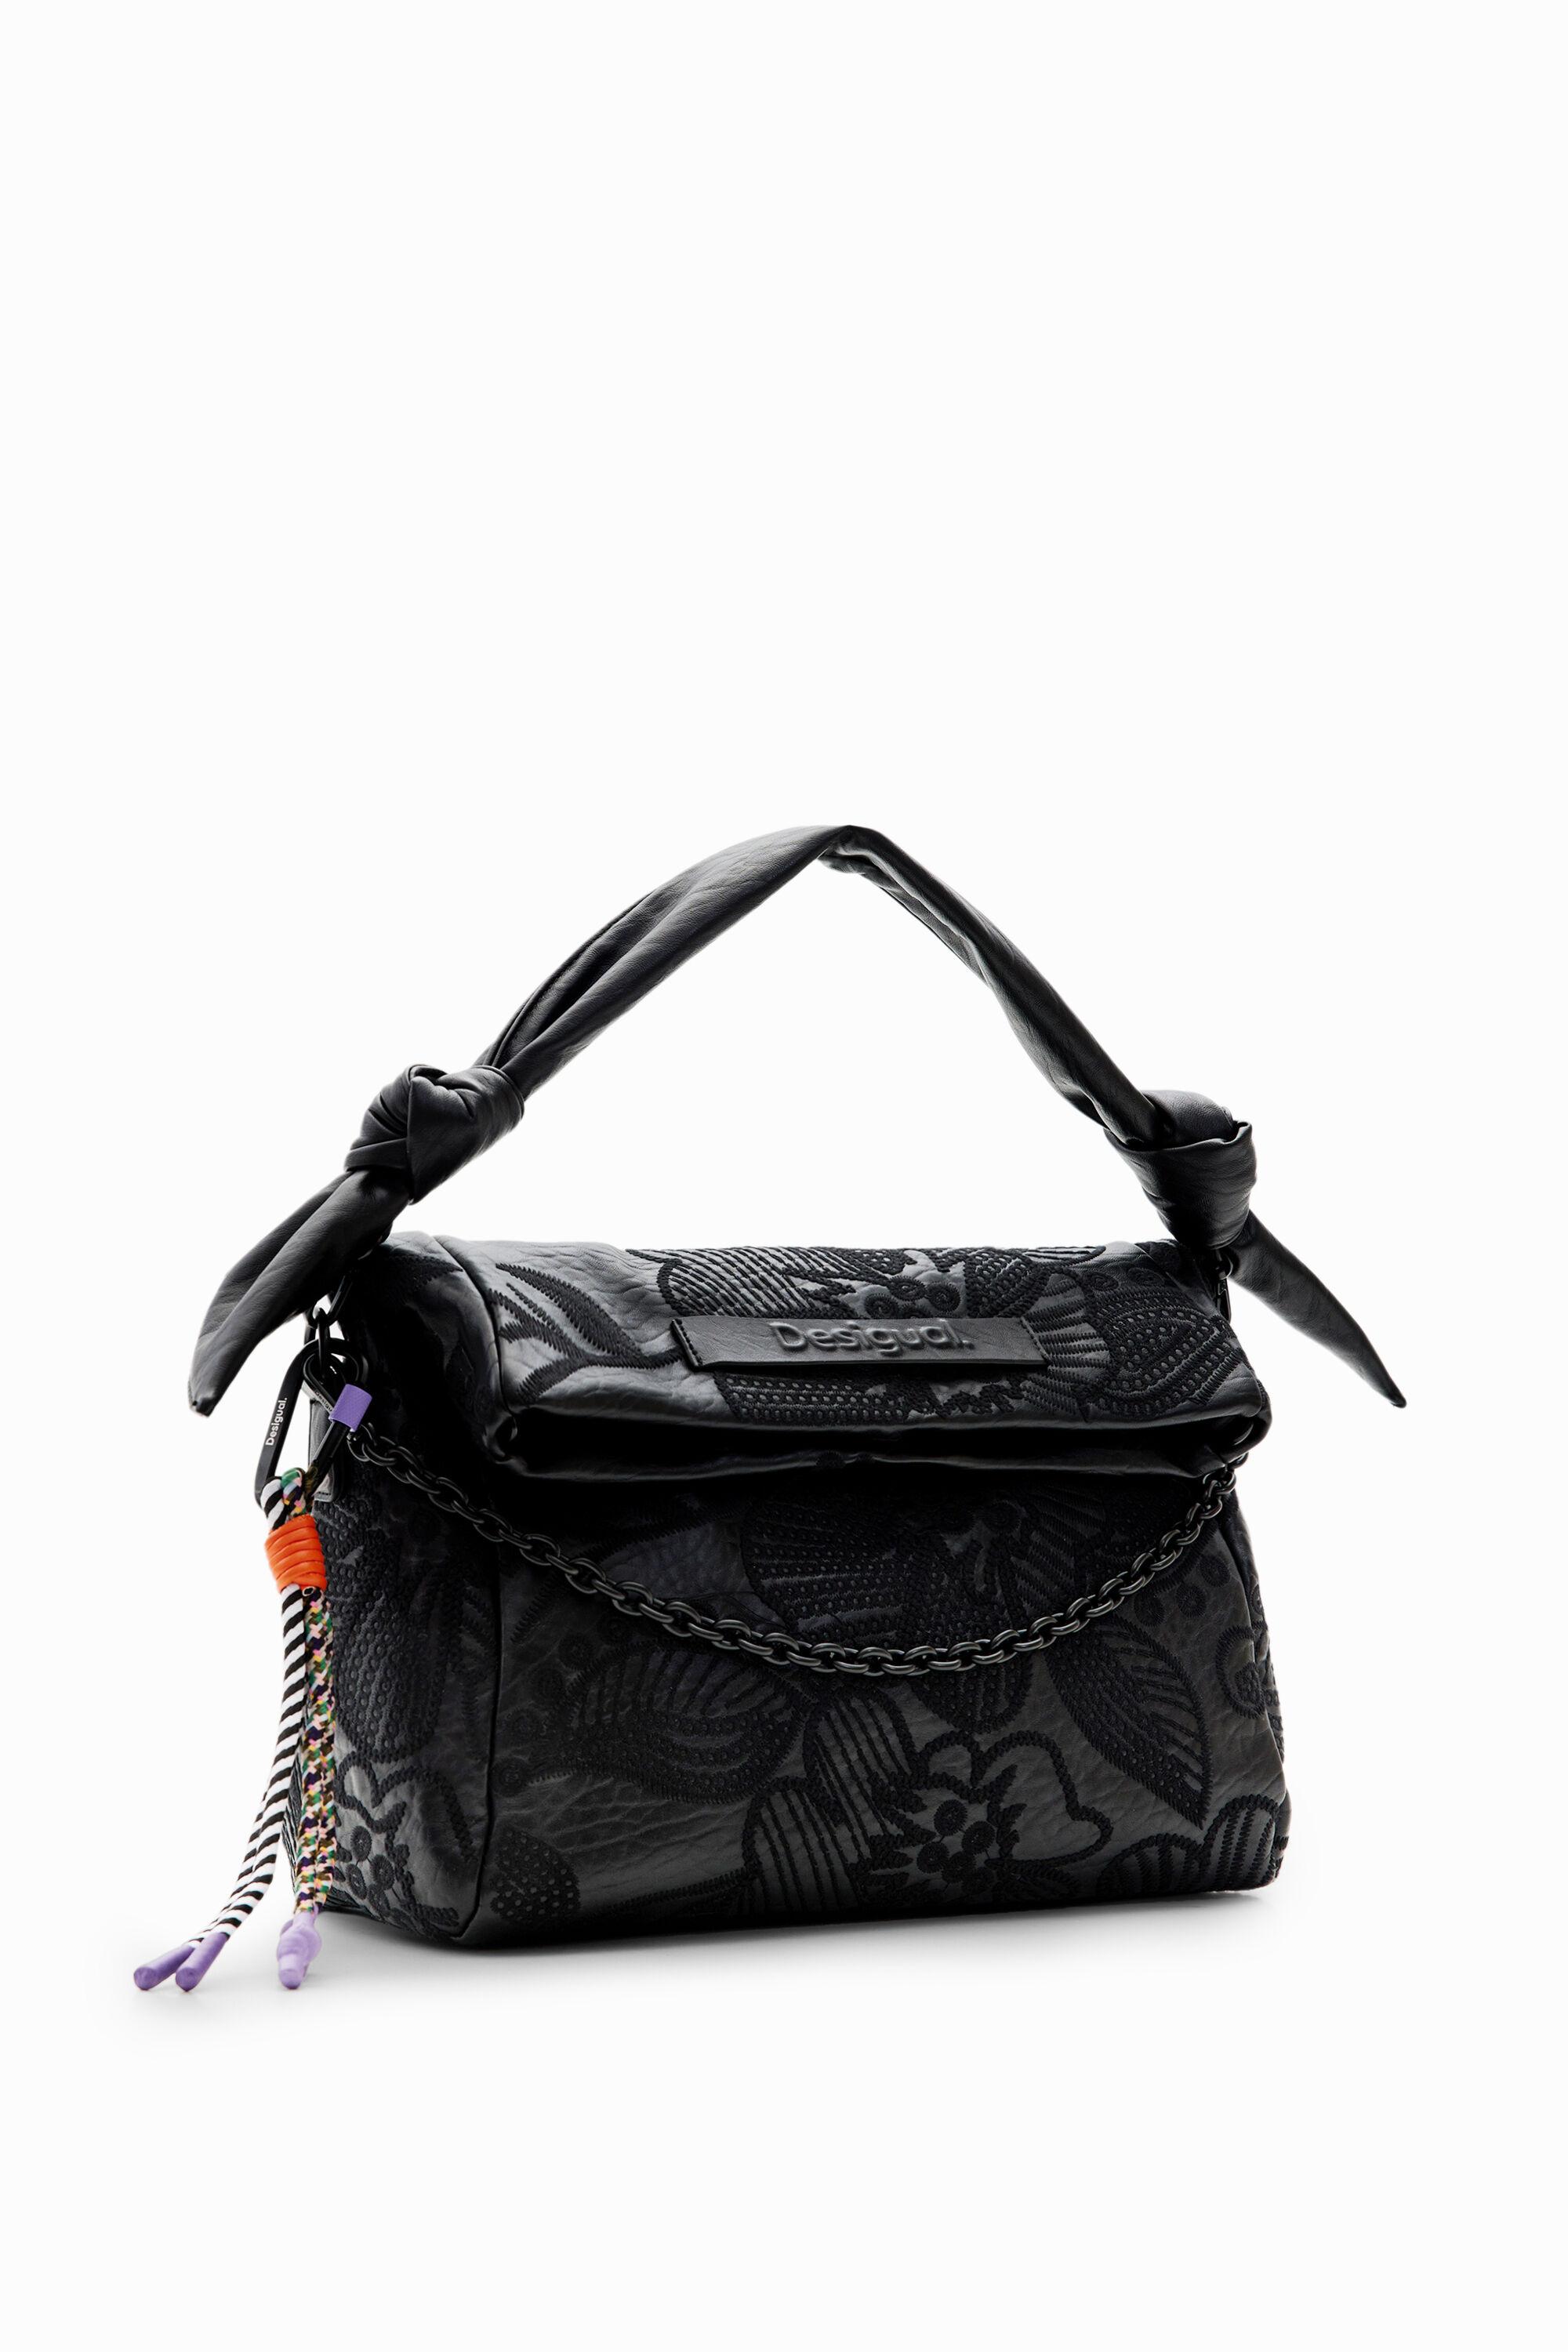 Desigual Midsize Floral Embroidery Bag in Black | Lyst